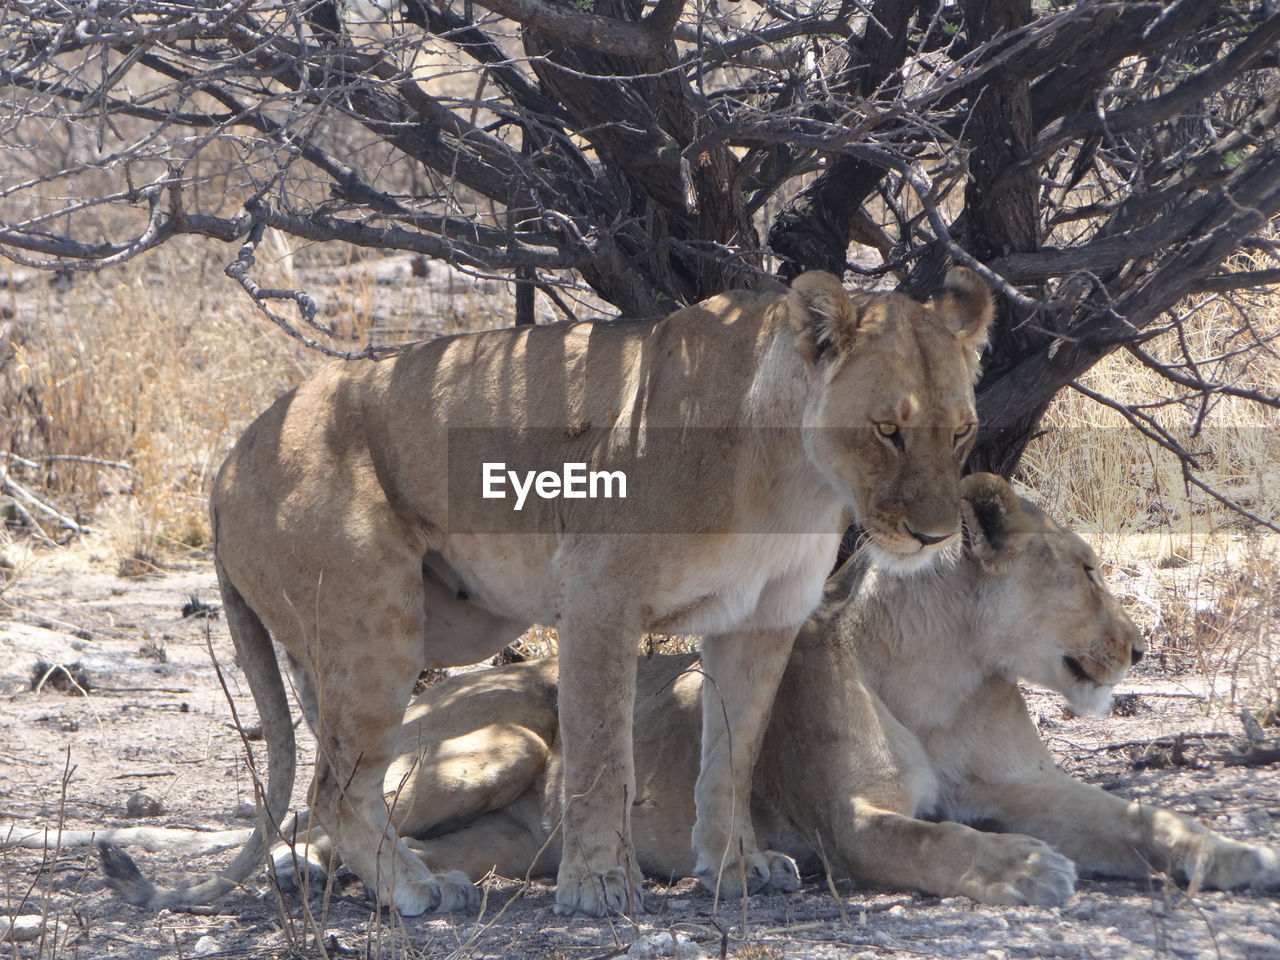 Two lions are resting under a bush in the etosha national park in namibia